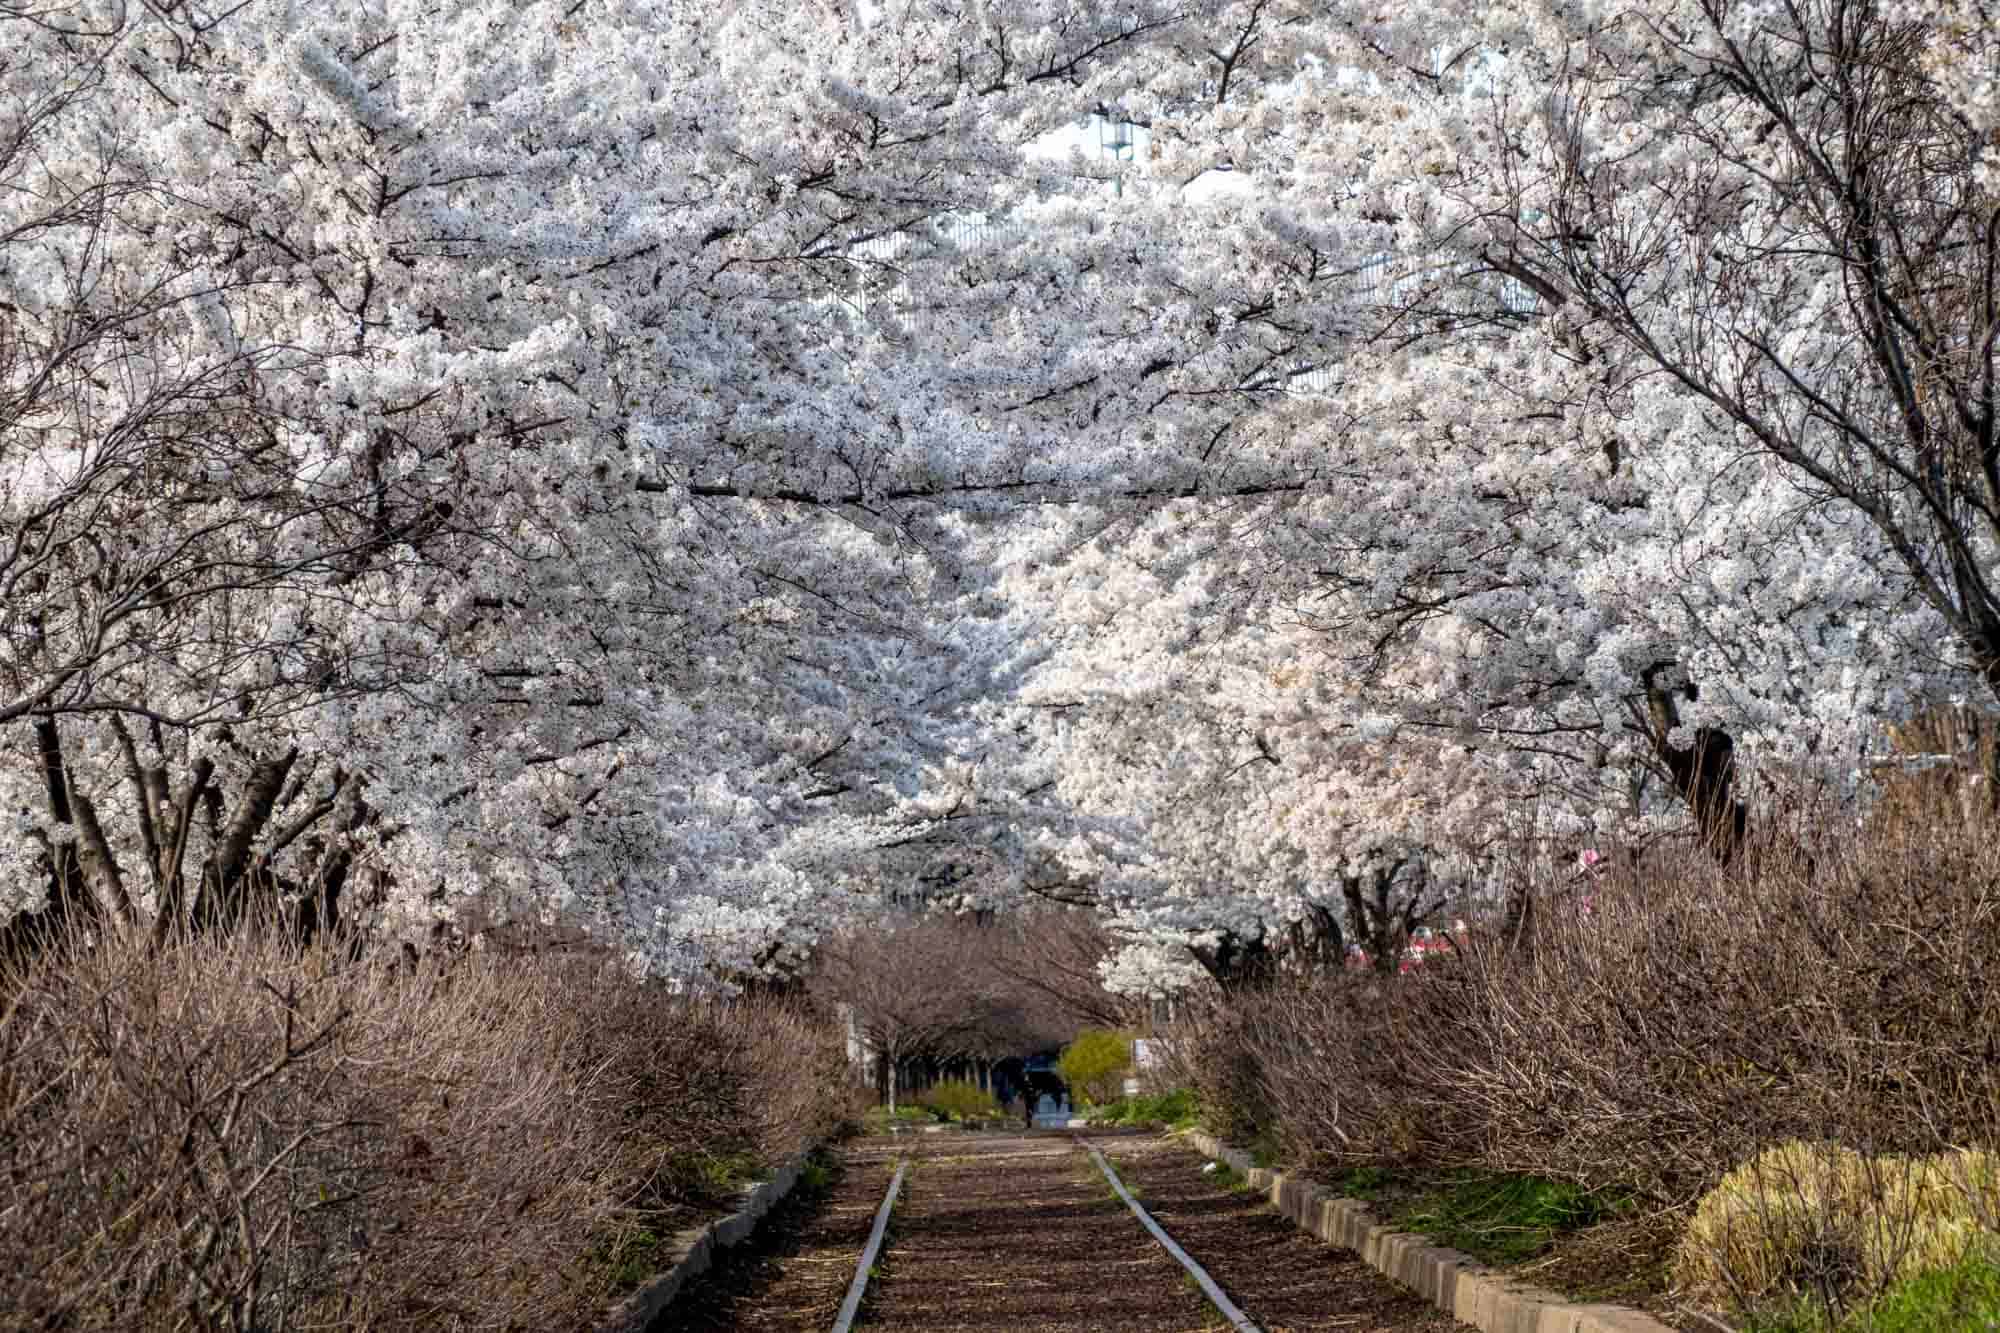 Trolley tracks surrounded by a canopy of white cherry blossoms